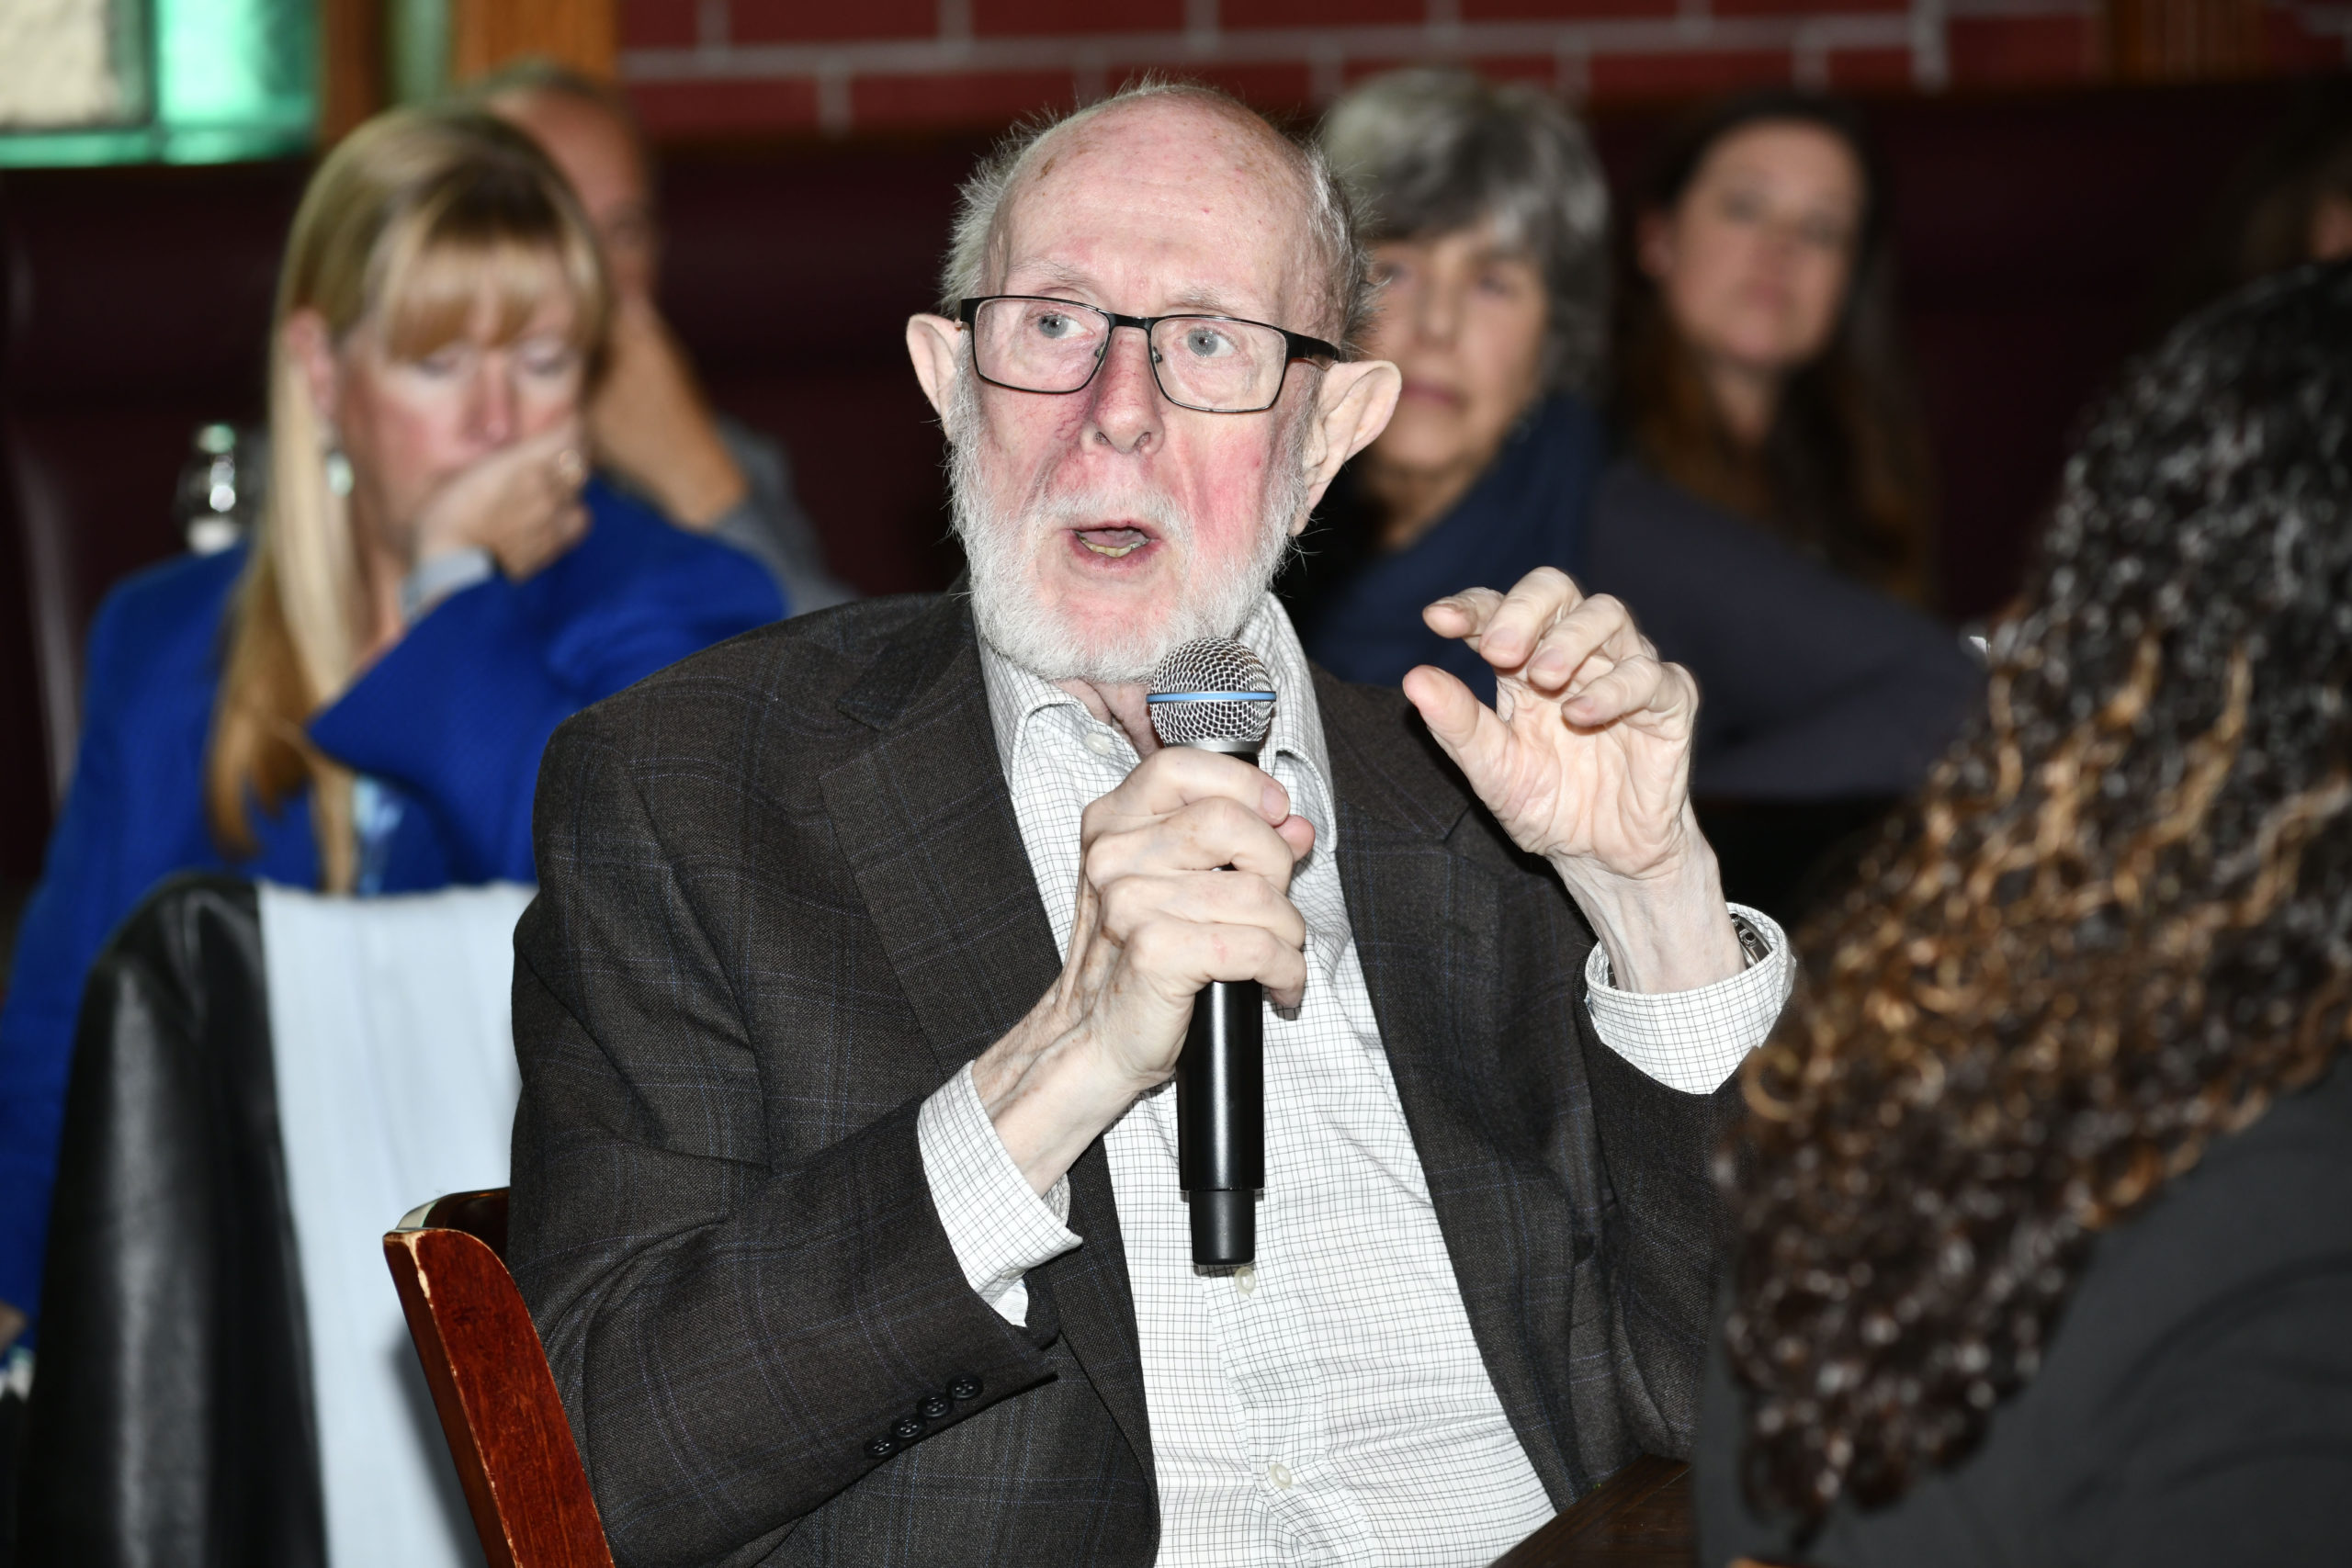 Hank Beck at Press Sessions event in 2019.  PRESS FILE